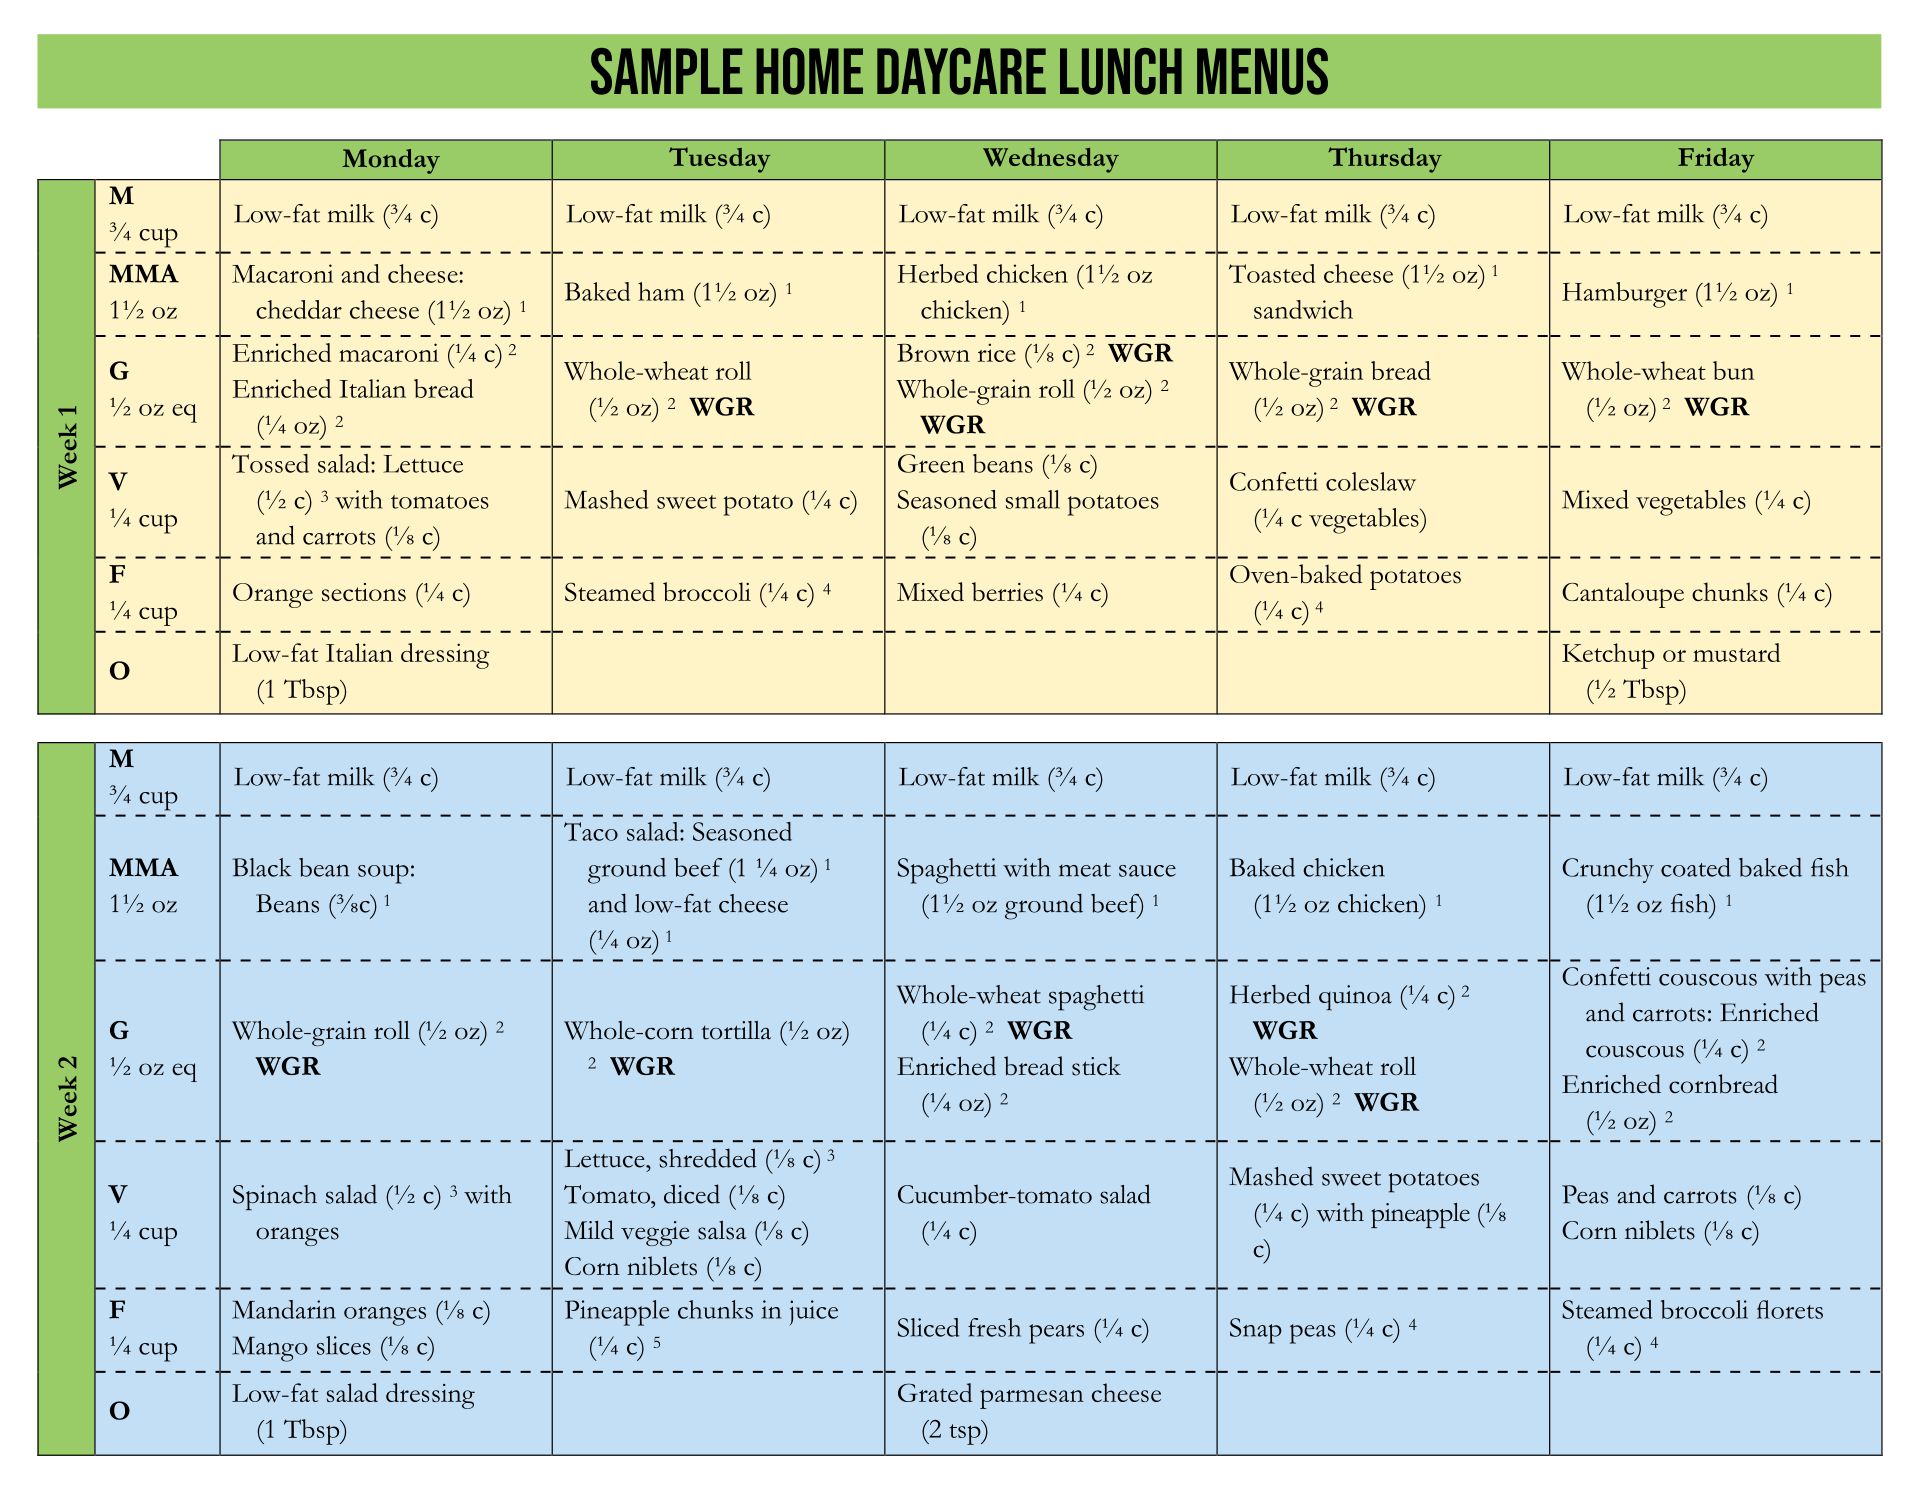 Sample Home Daycare Lunch Menus